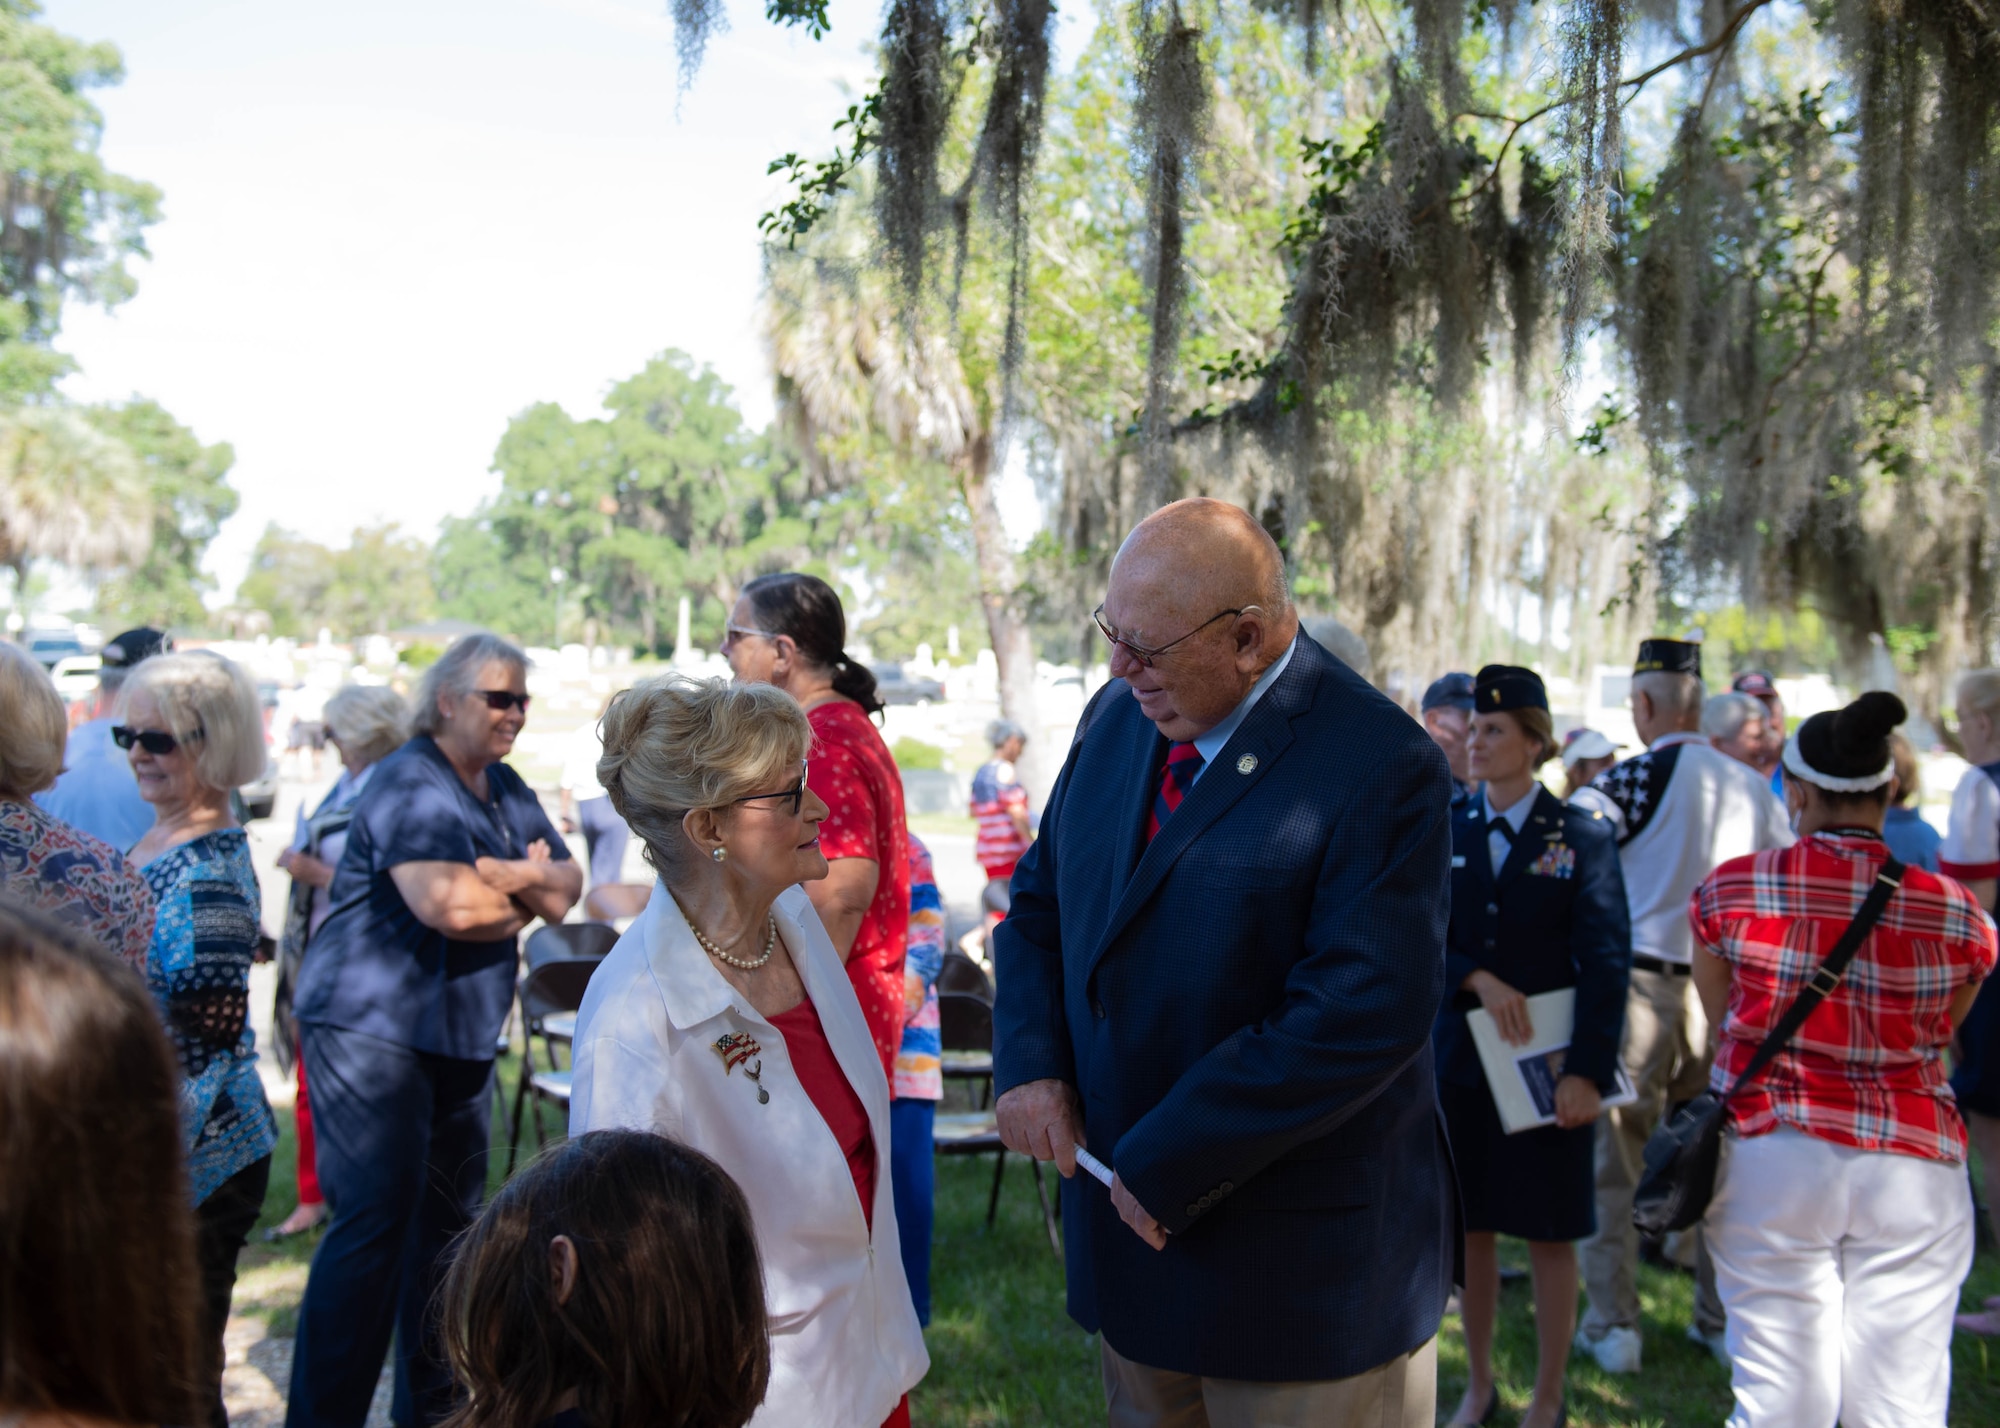 A photo of Dr. Lucy speaking with a community leader.